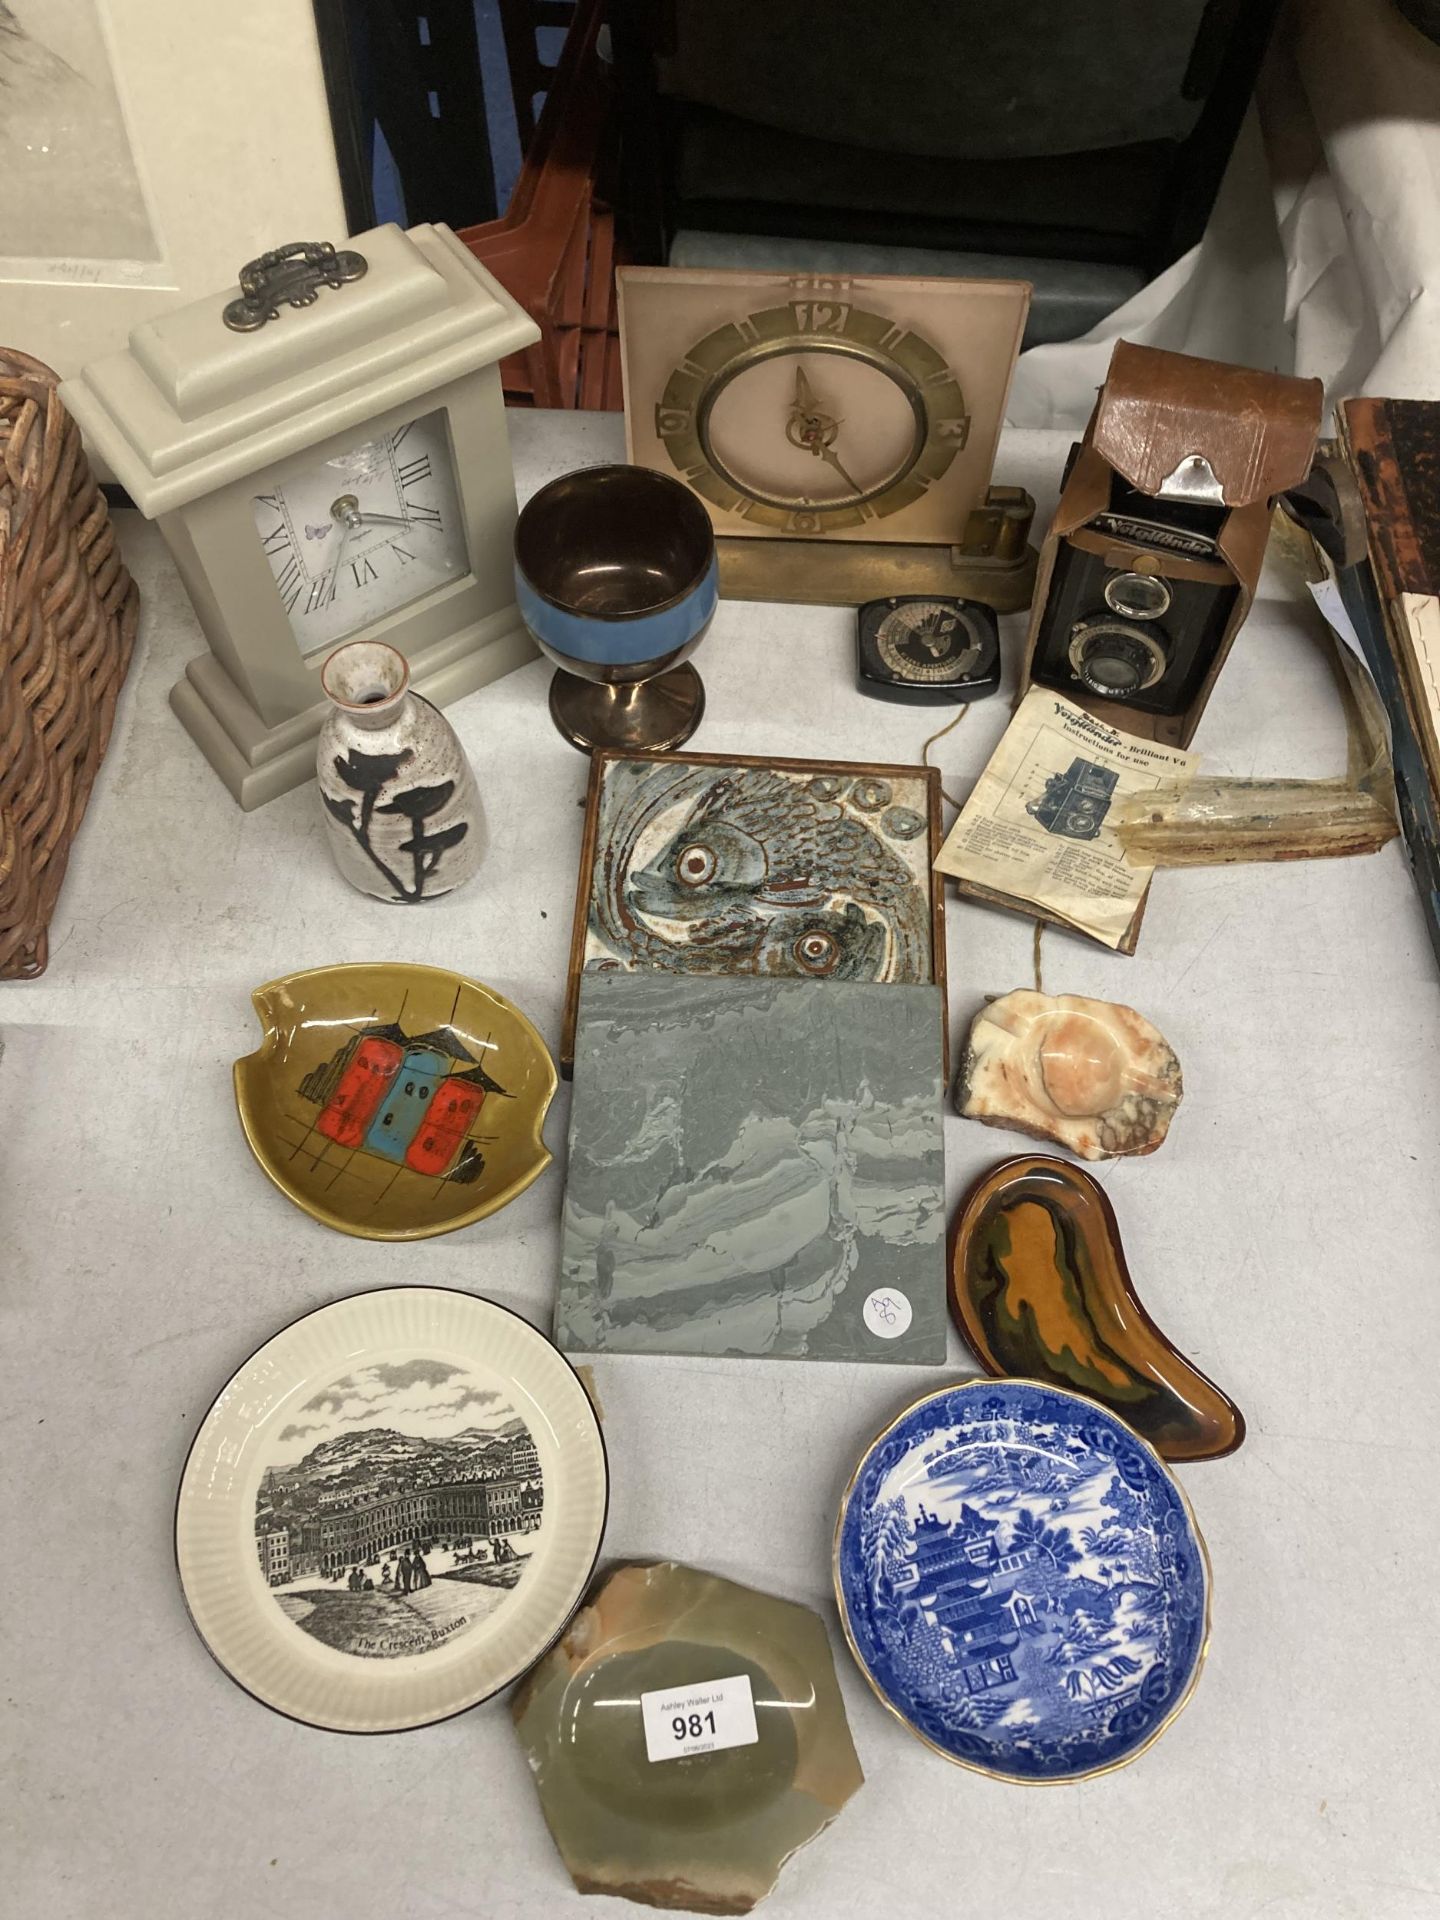 A MIXED LOT TO INCLUDE A VINTAGE VOIGTLANDER CAMERA, MANTLE CLOCKS, ONYX ASHTRAYS, STUDIO POTTERY